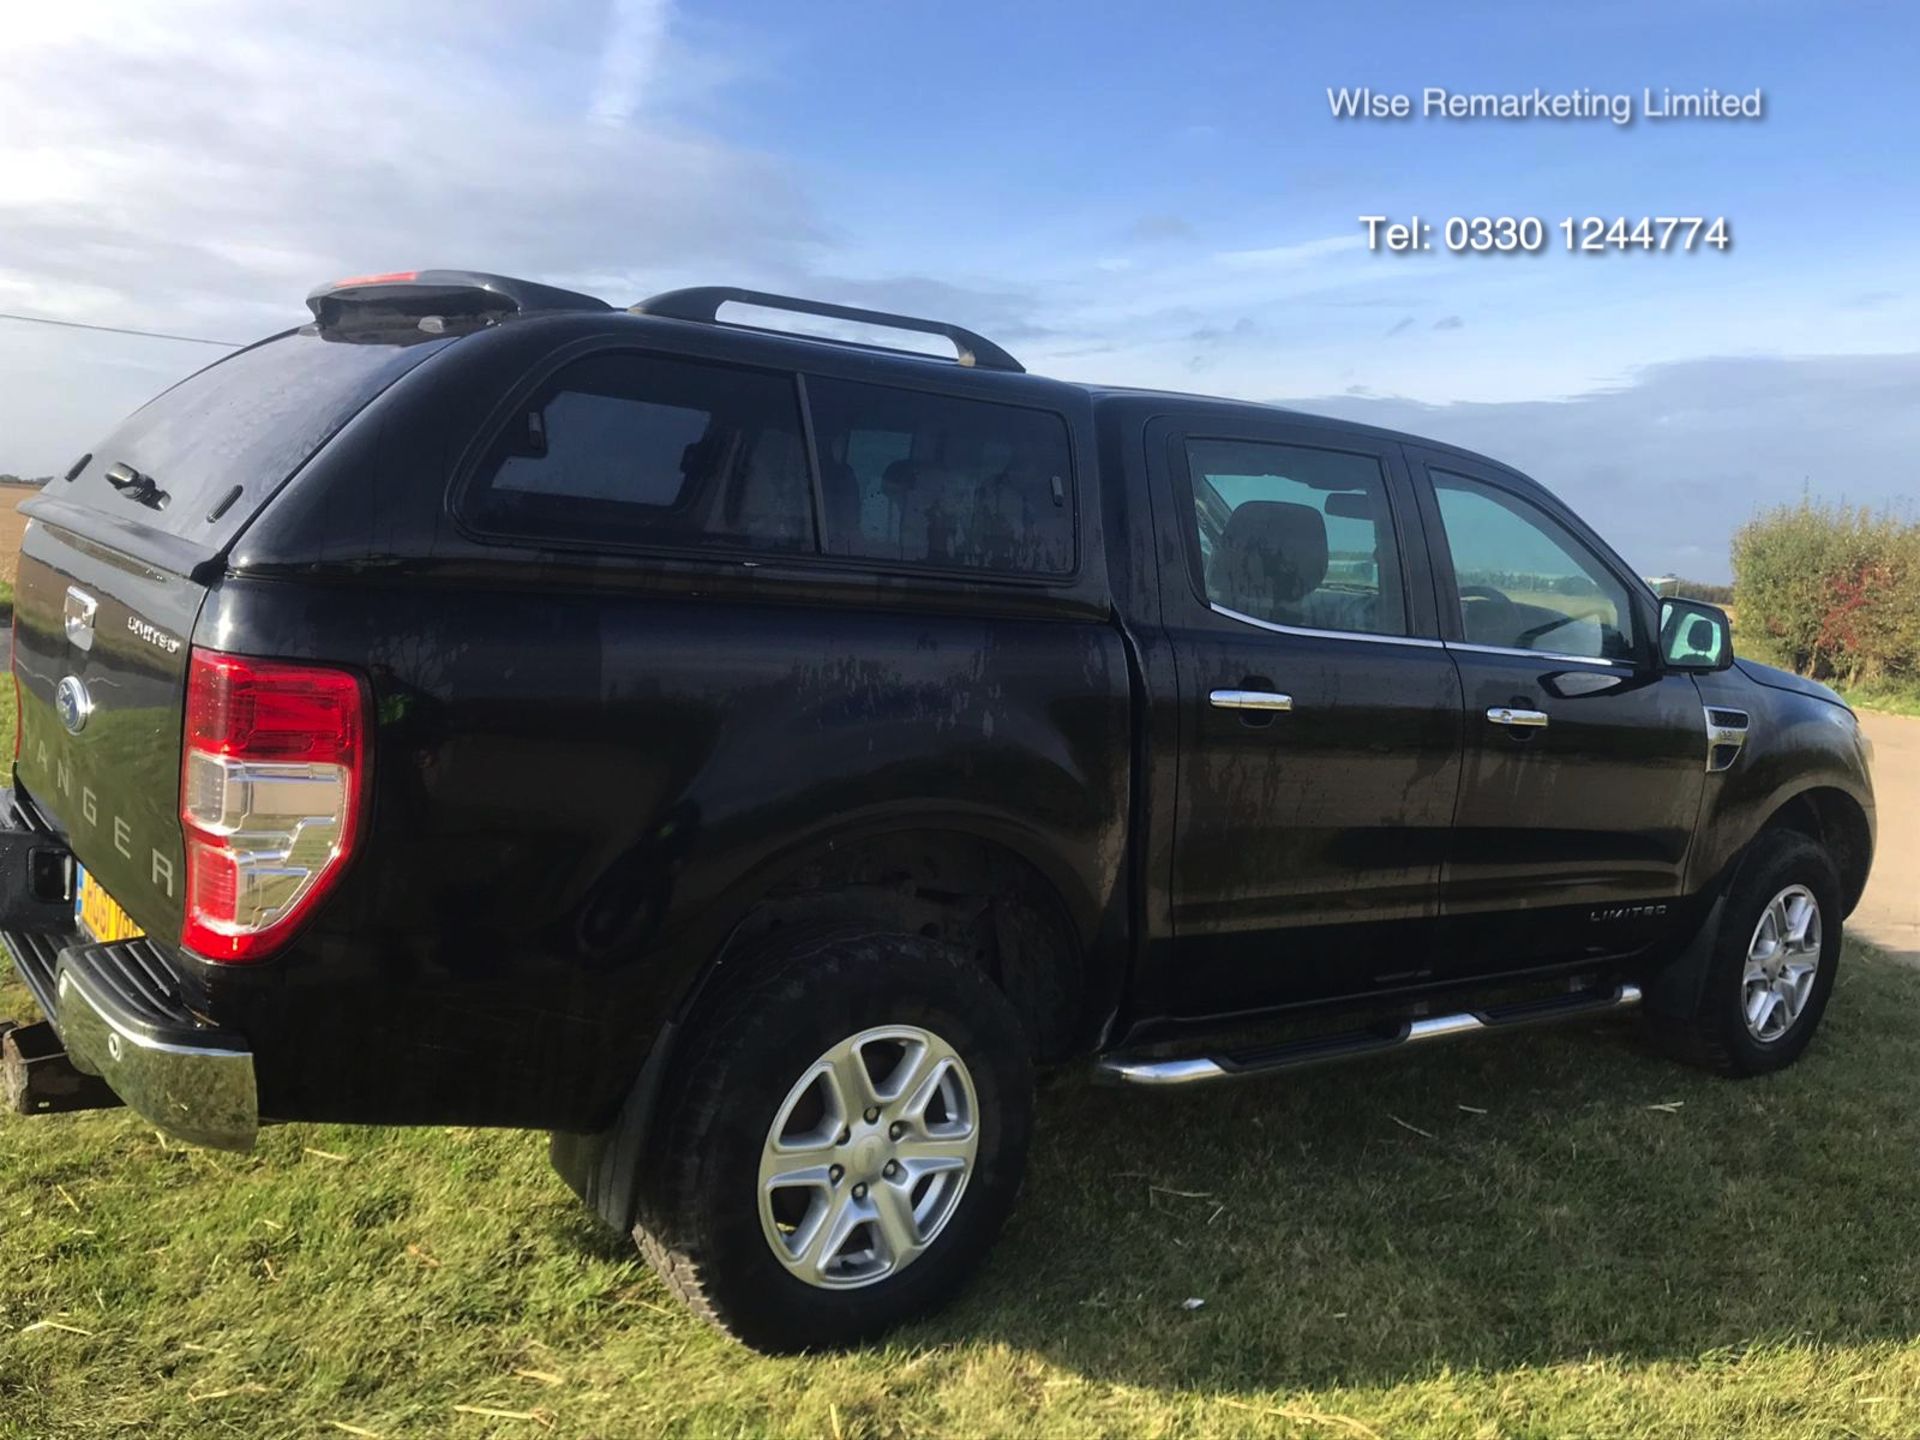 Ford Ranger 3.2l Tdci (200 BHP) Limited 4x4 - 2012 Model - Black - Double Cab - Image 4 of 18